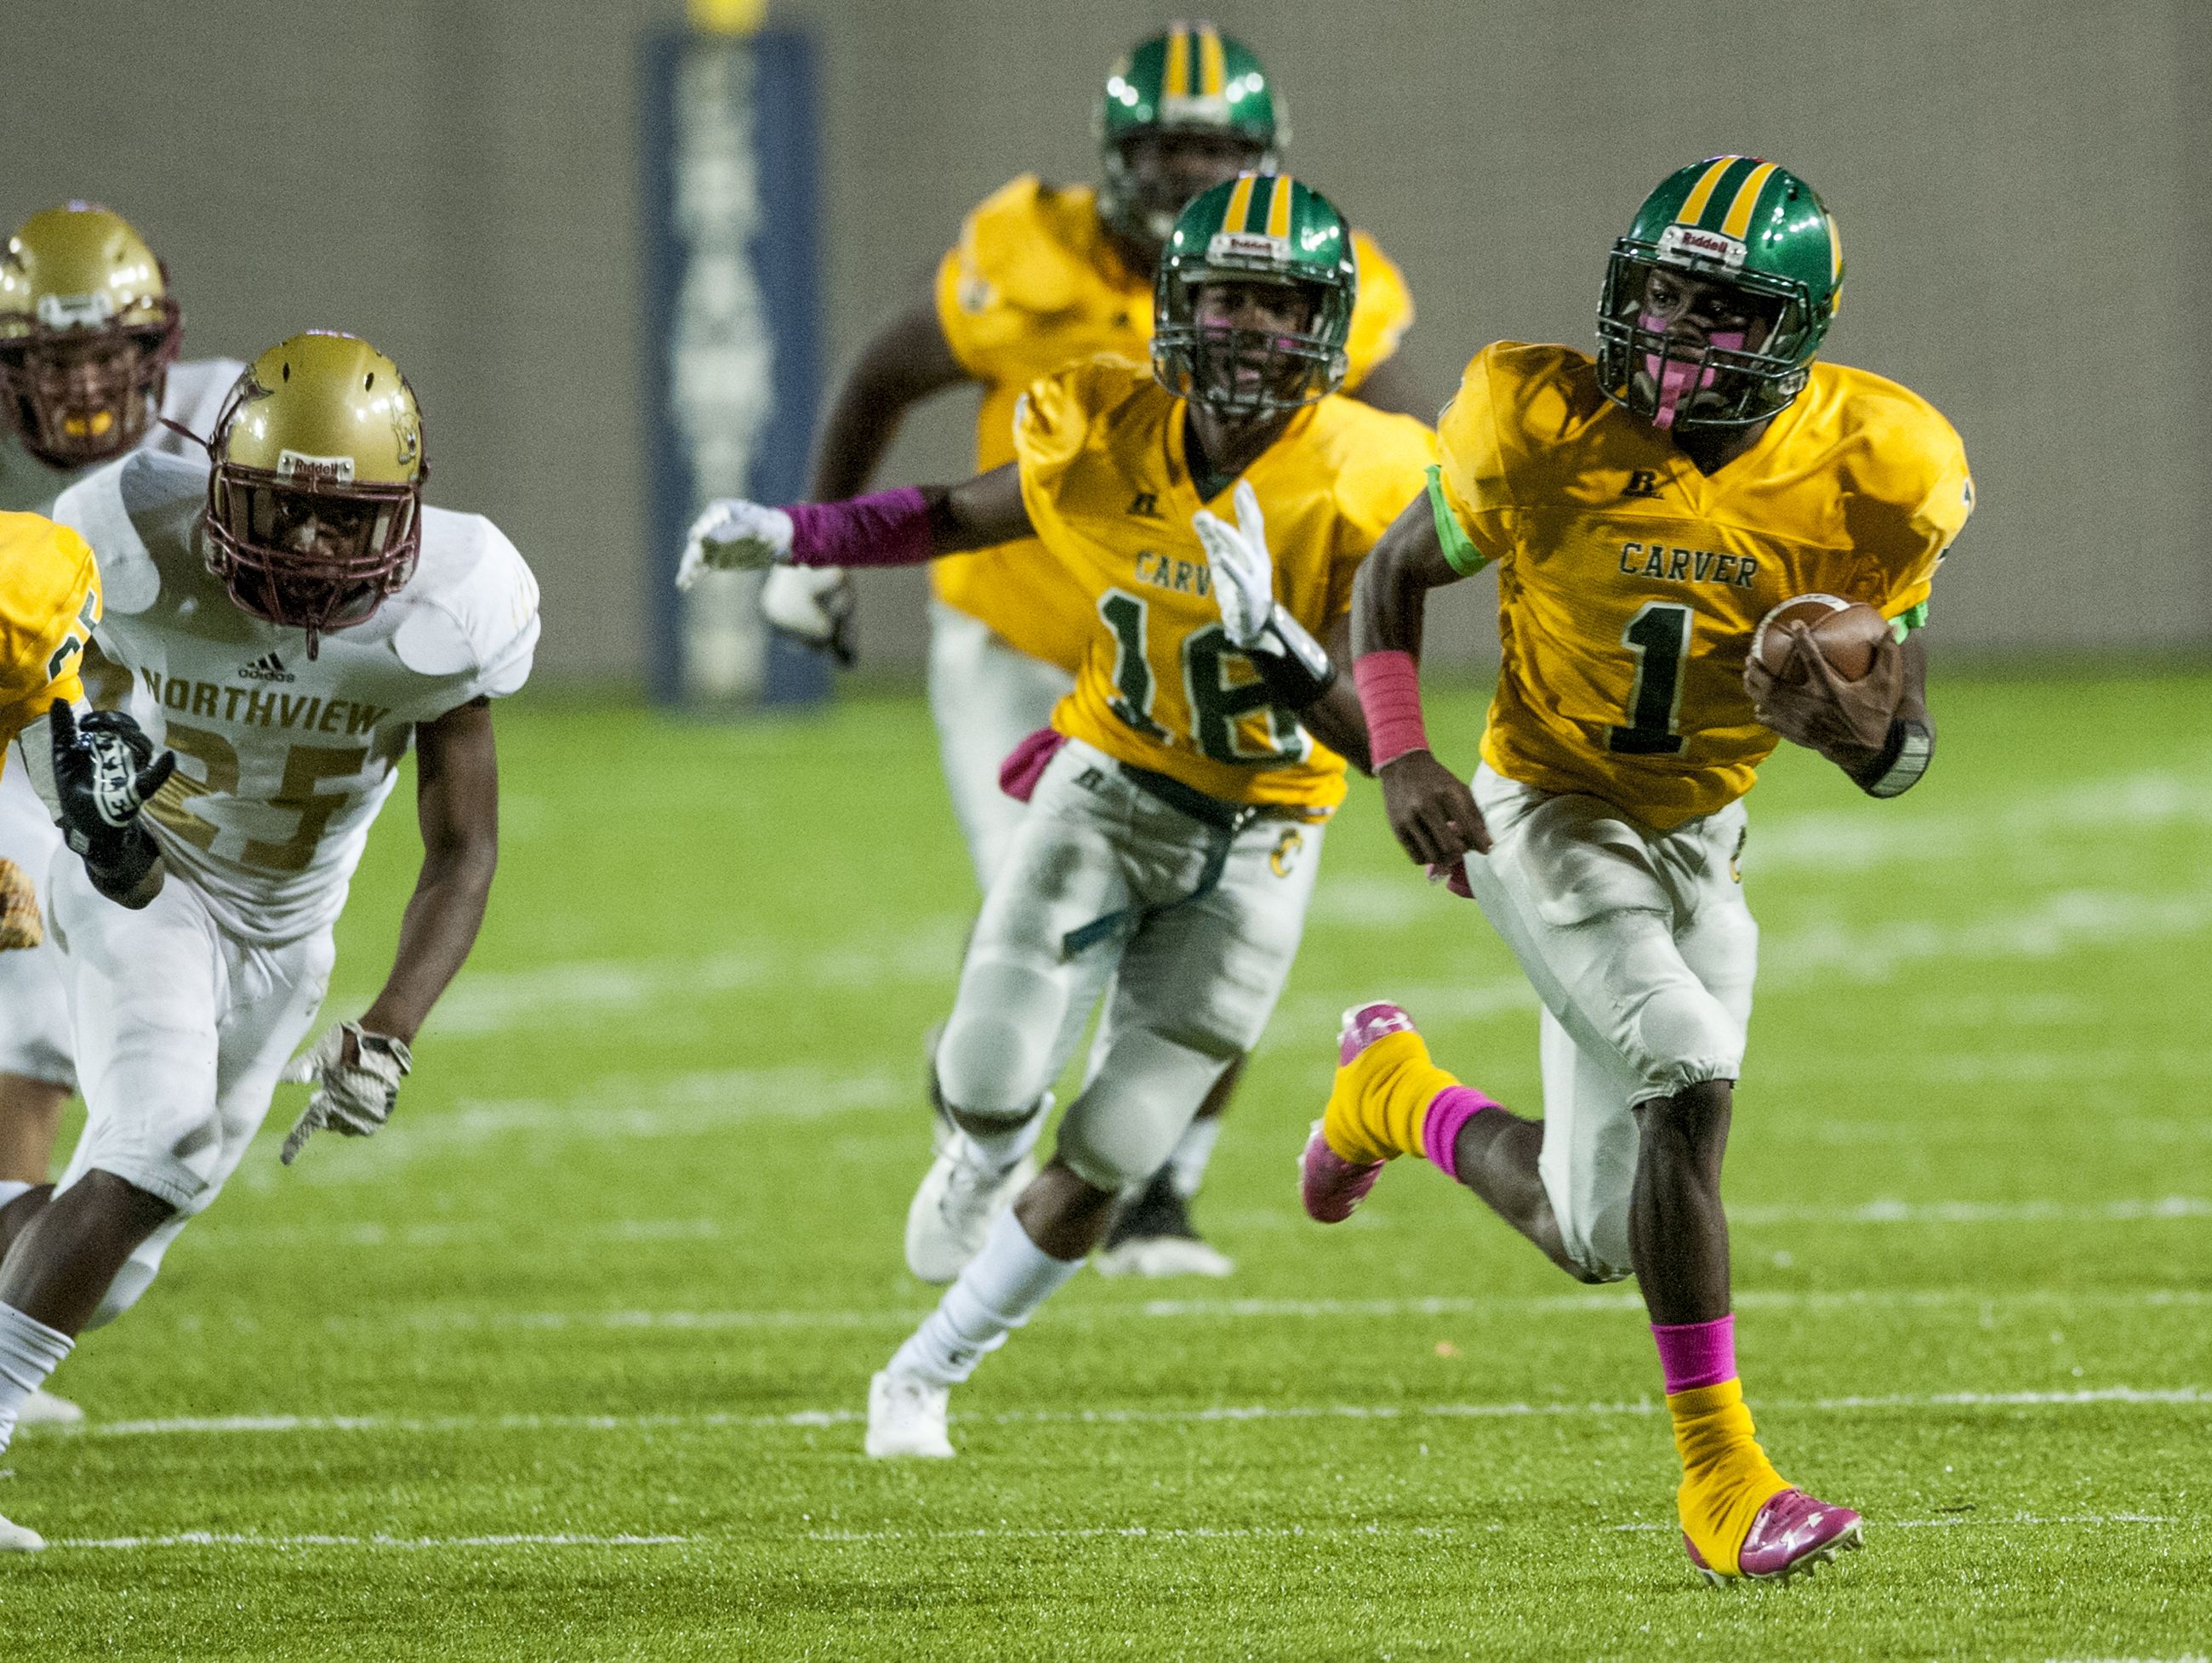 Carver's Ronald Harris (1) breaks free for a long first half touchdown run against Northview at Cramton Bowl in Montgomery, Ala., on Thursday October 13, 2016.